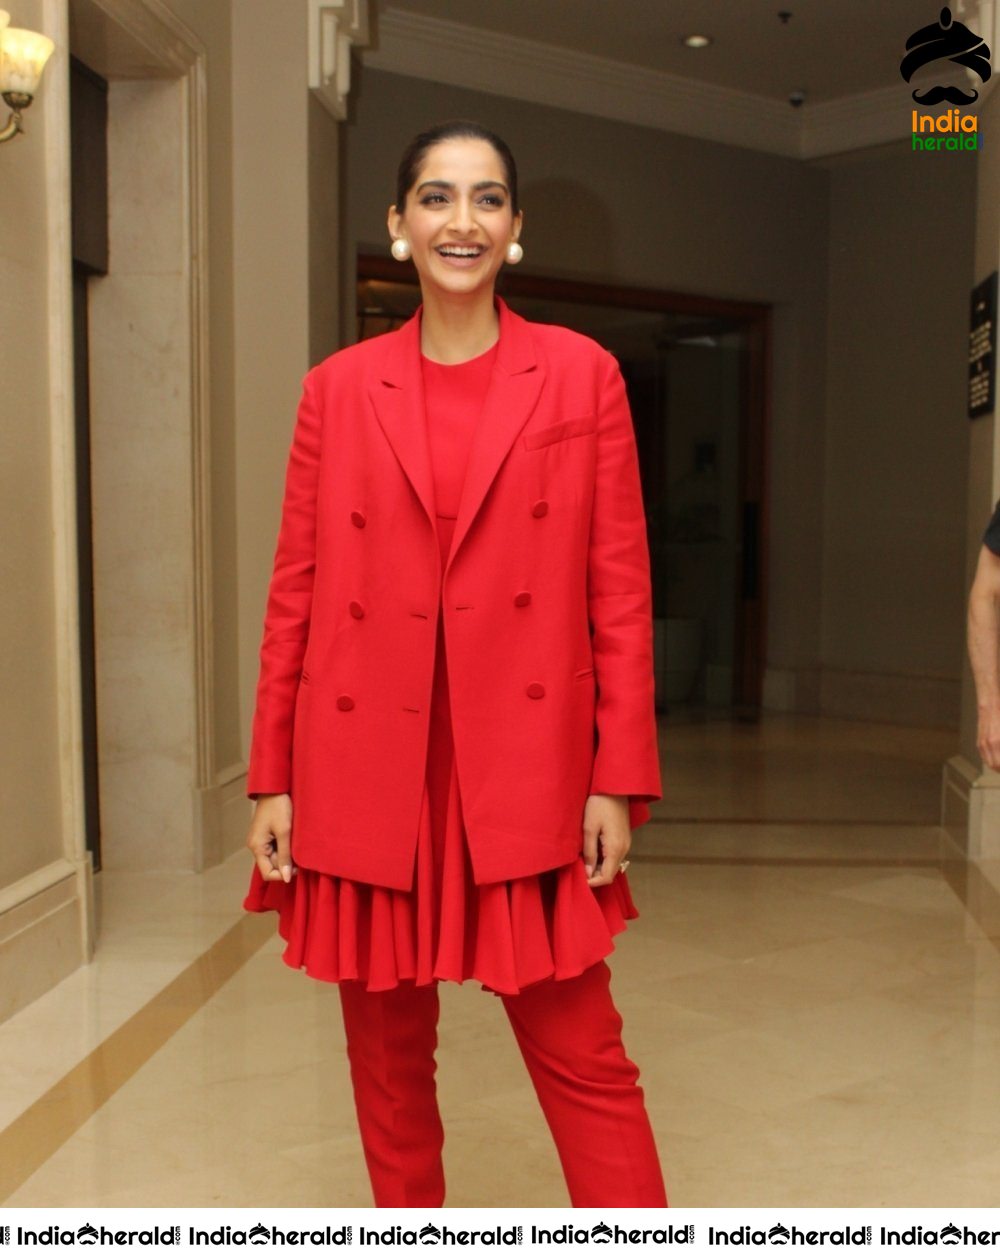 Sonam Kapoor And Dulquer Salmaan During The Zoya Factor Promotions